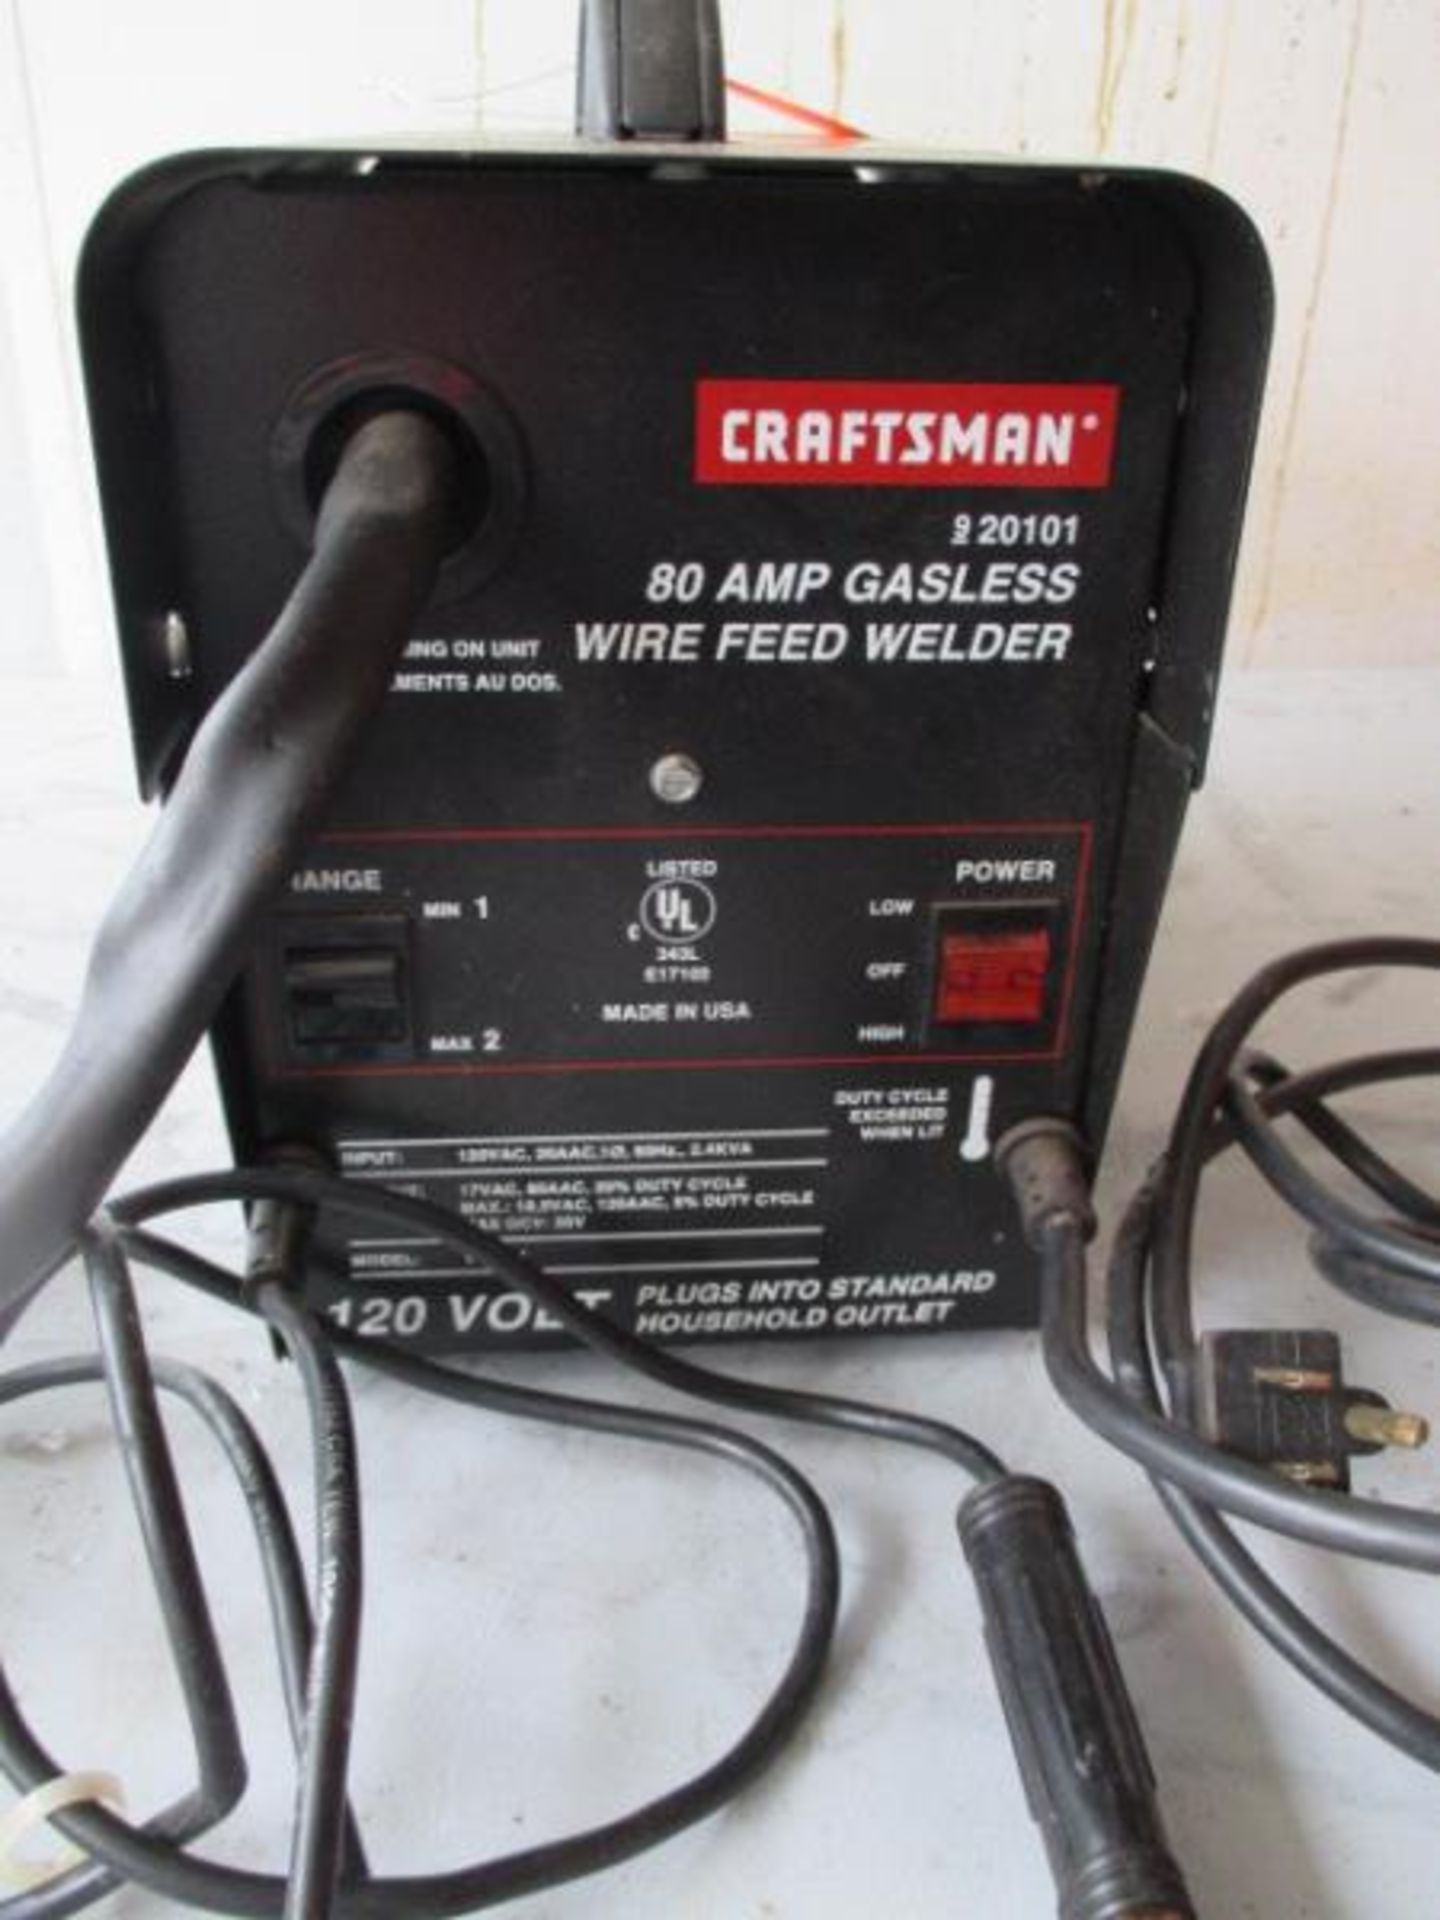 Craftsman Wire Feed Welder, Model: 920101, 80 Amp Gasless, 120 Volt, Plugs Into Standard Household - Image 2 of 6